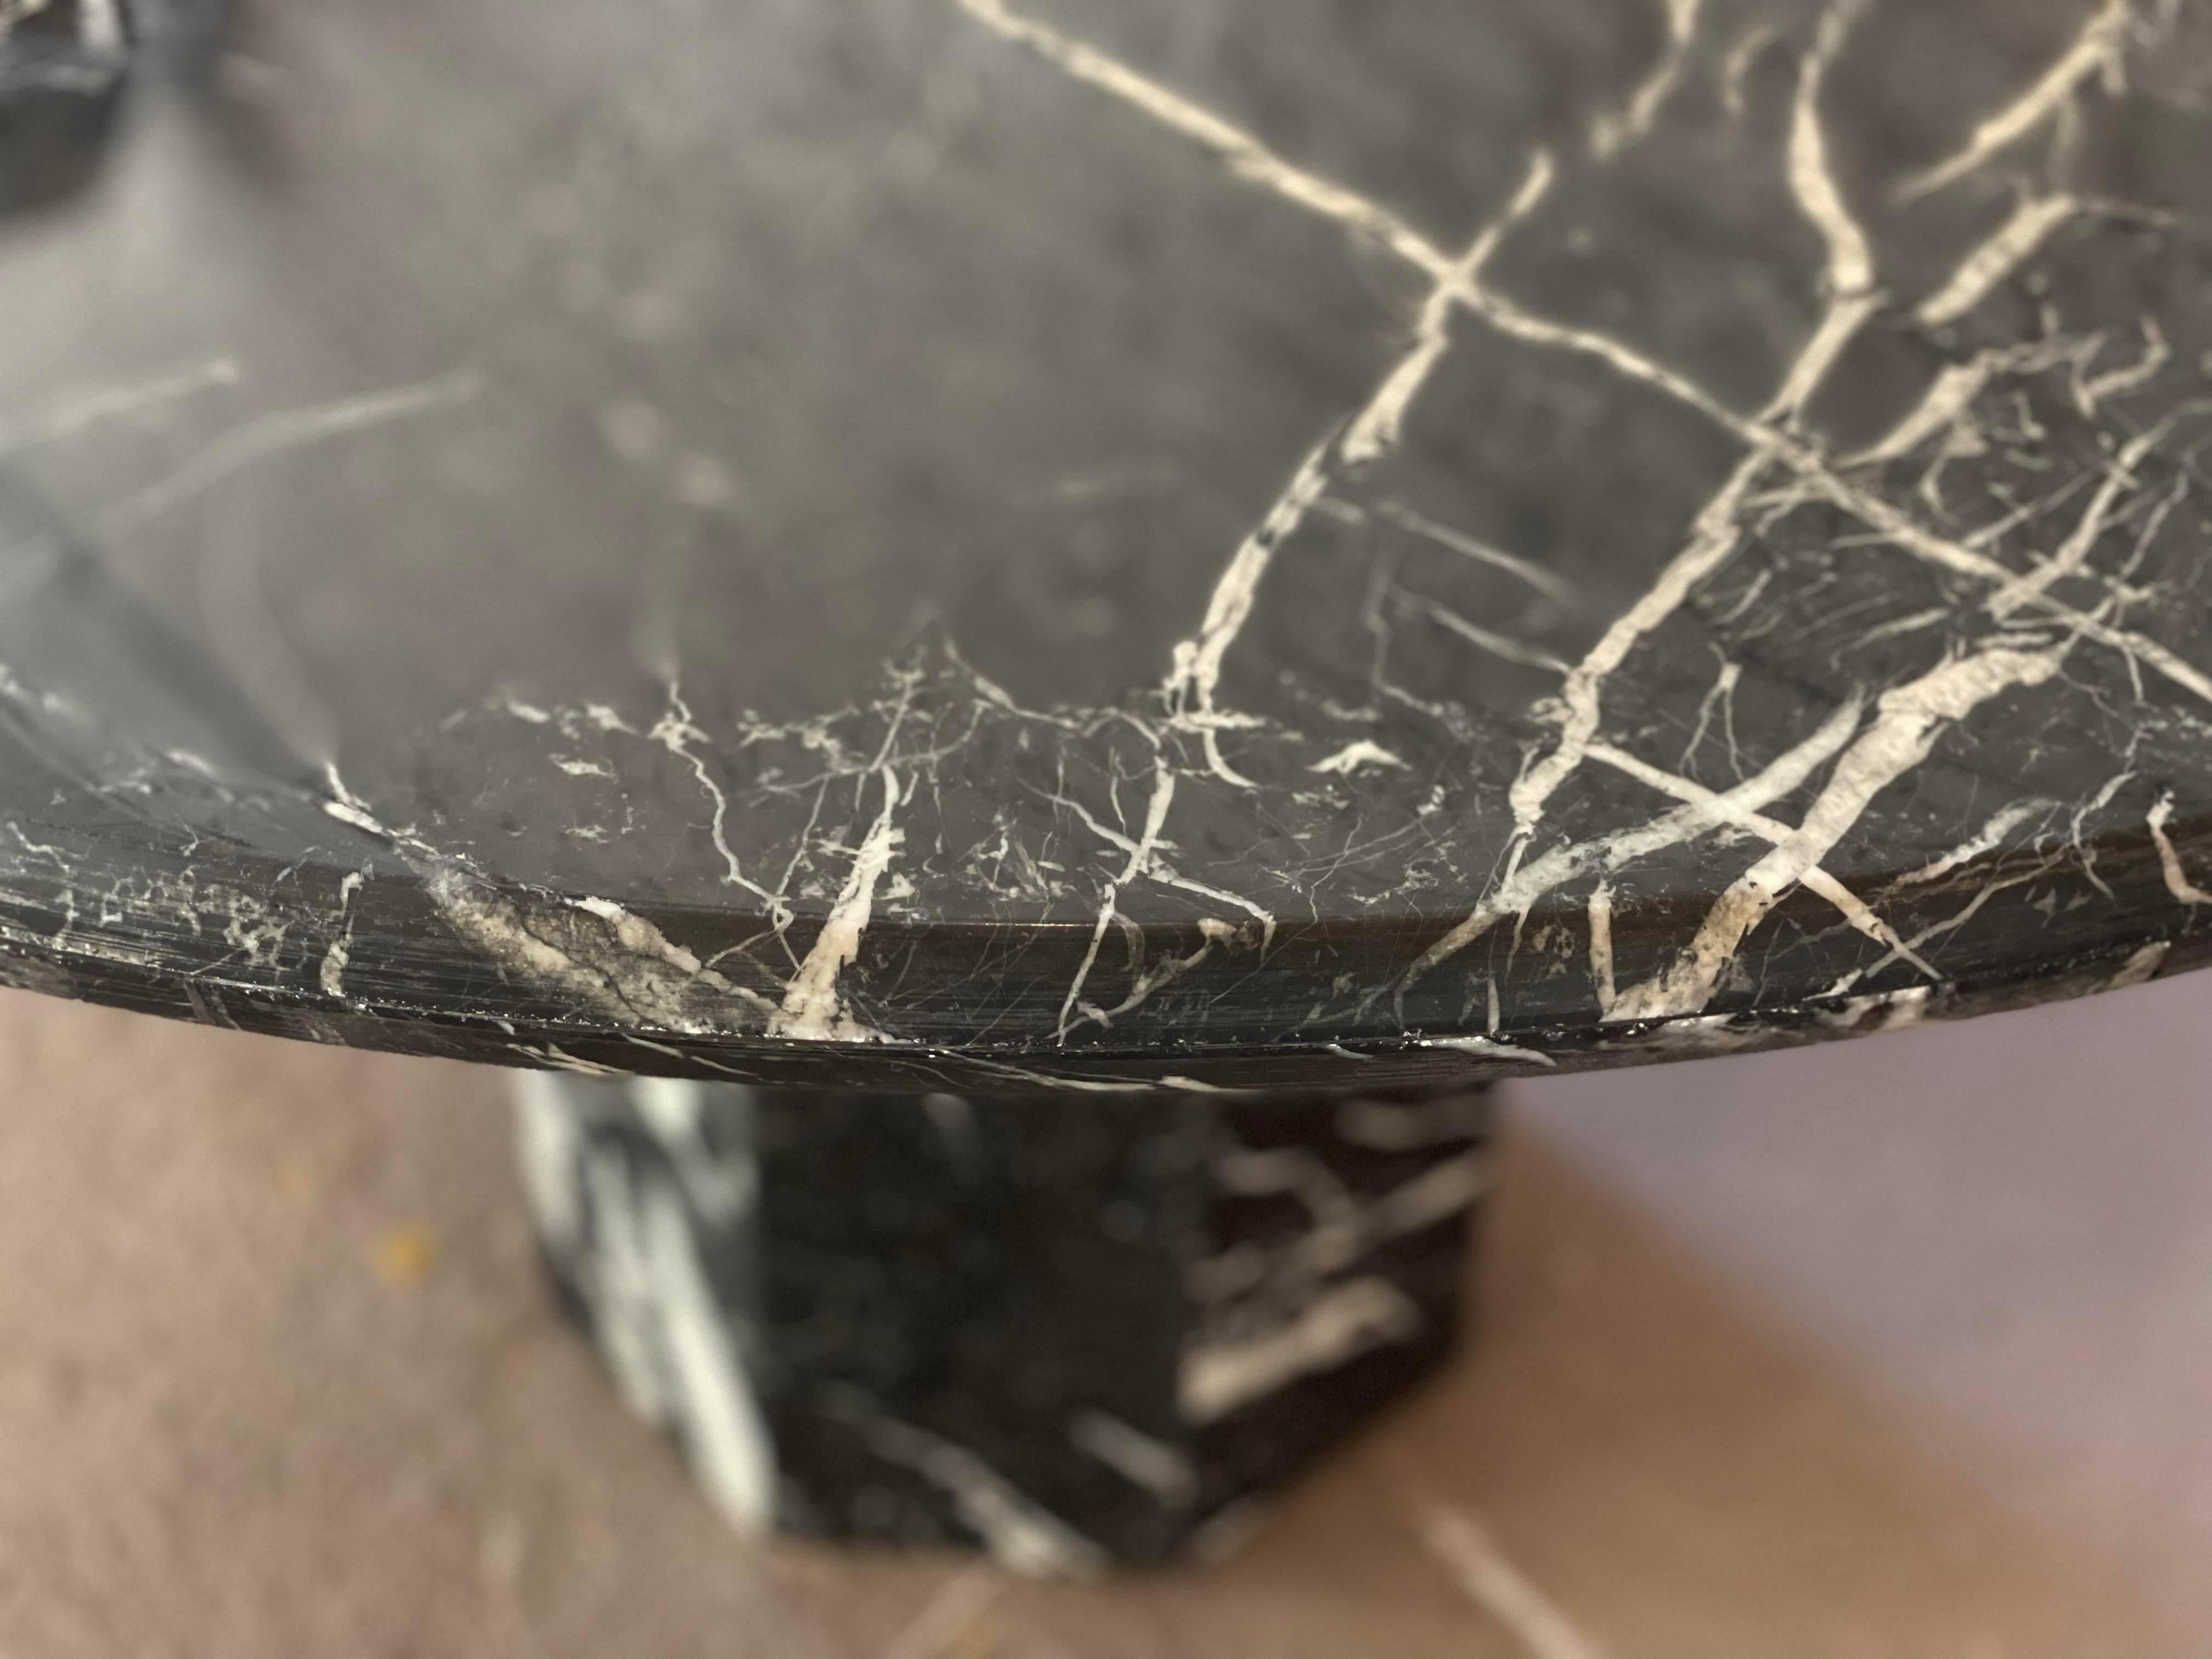 Beautiful black marble table. Perfect size for 4/5 chairs or an entry way table. The base has lots of drama while the top is calmer.

Dimensions: 49